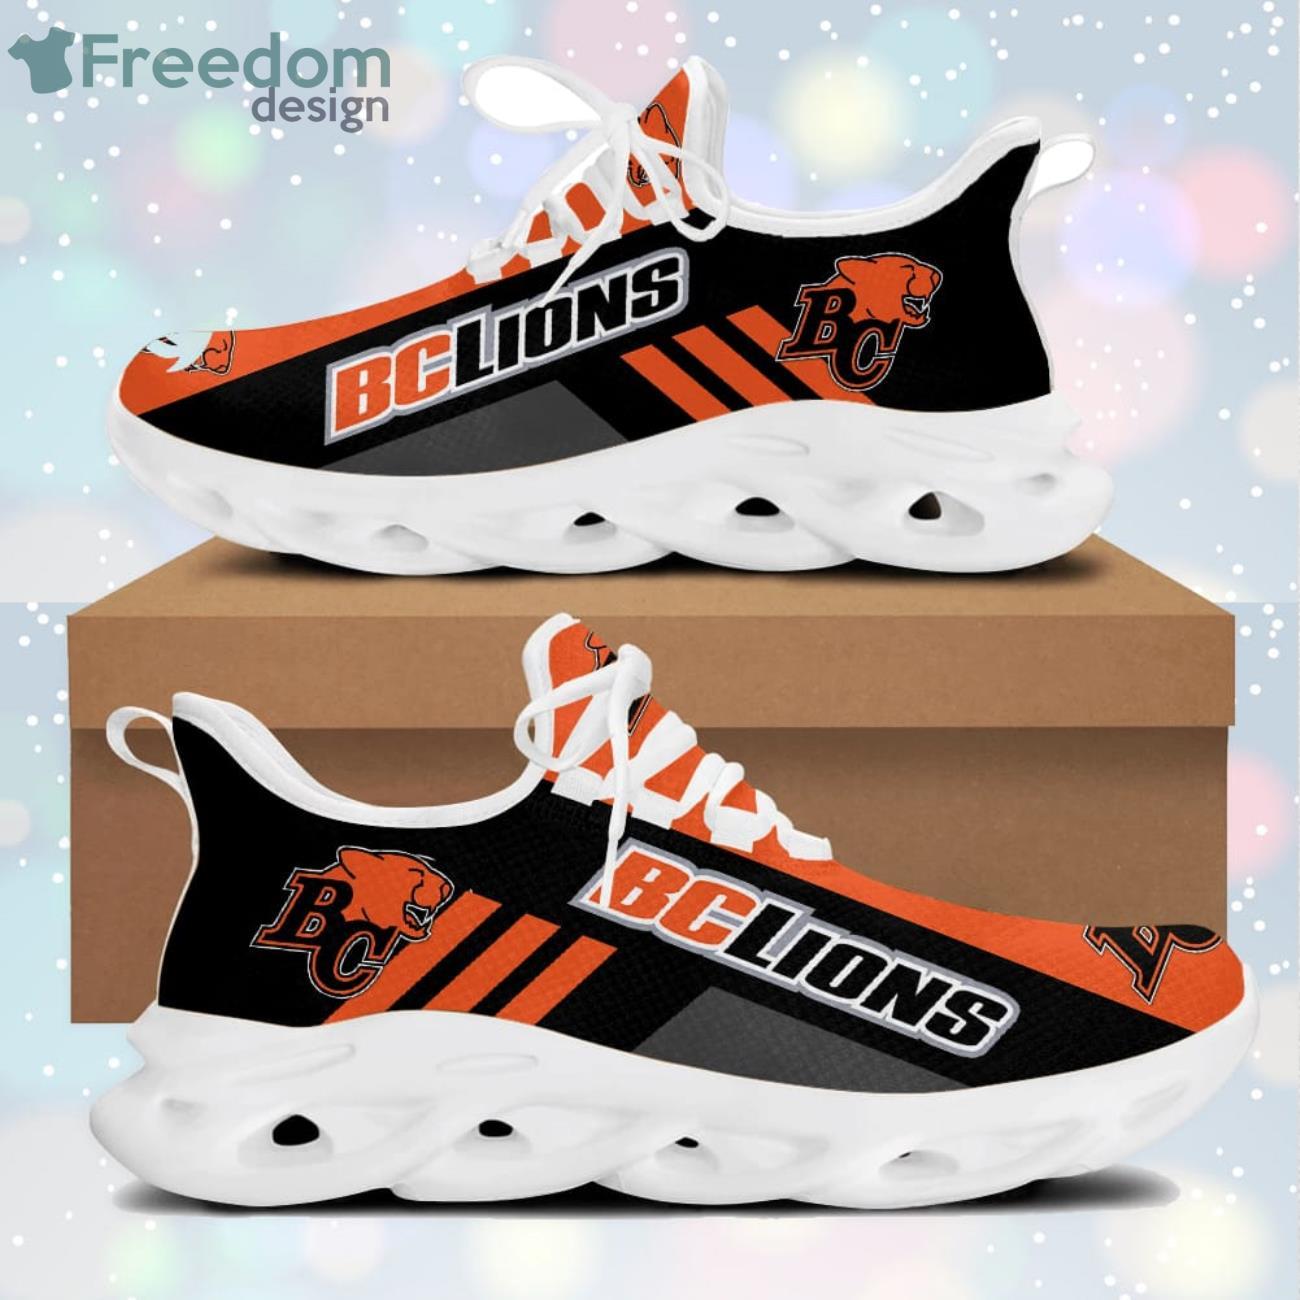 Stien Reklame morgenmad Bc Lions Max Soul Sneaker Running Shoes For Fans - Freedomdesign